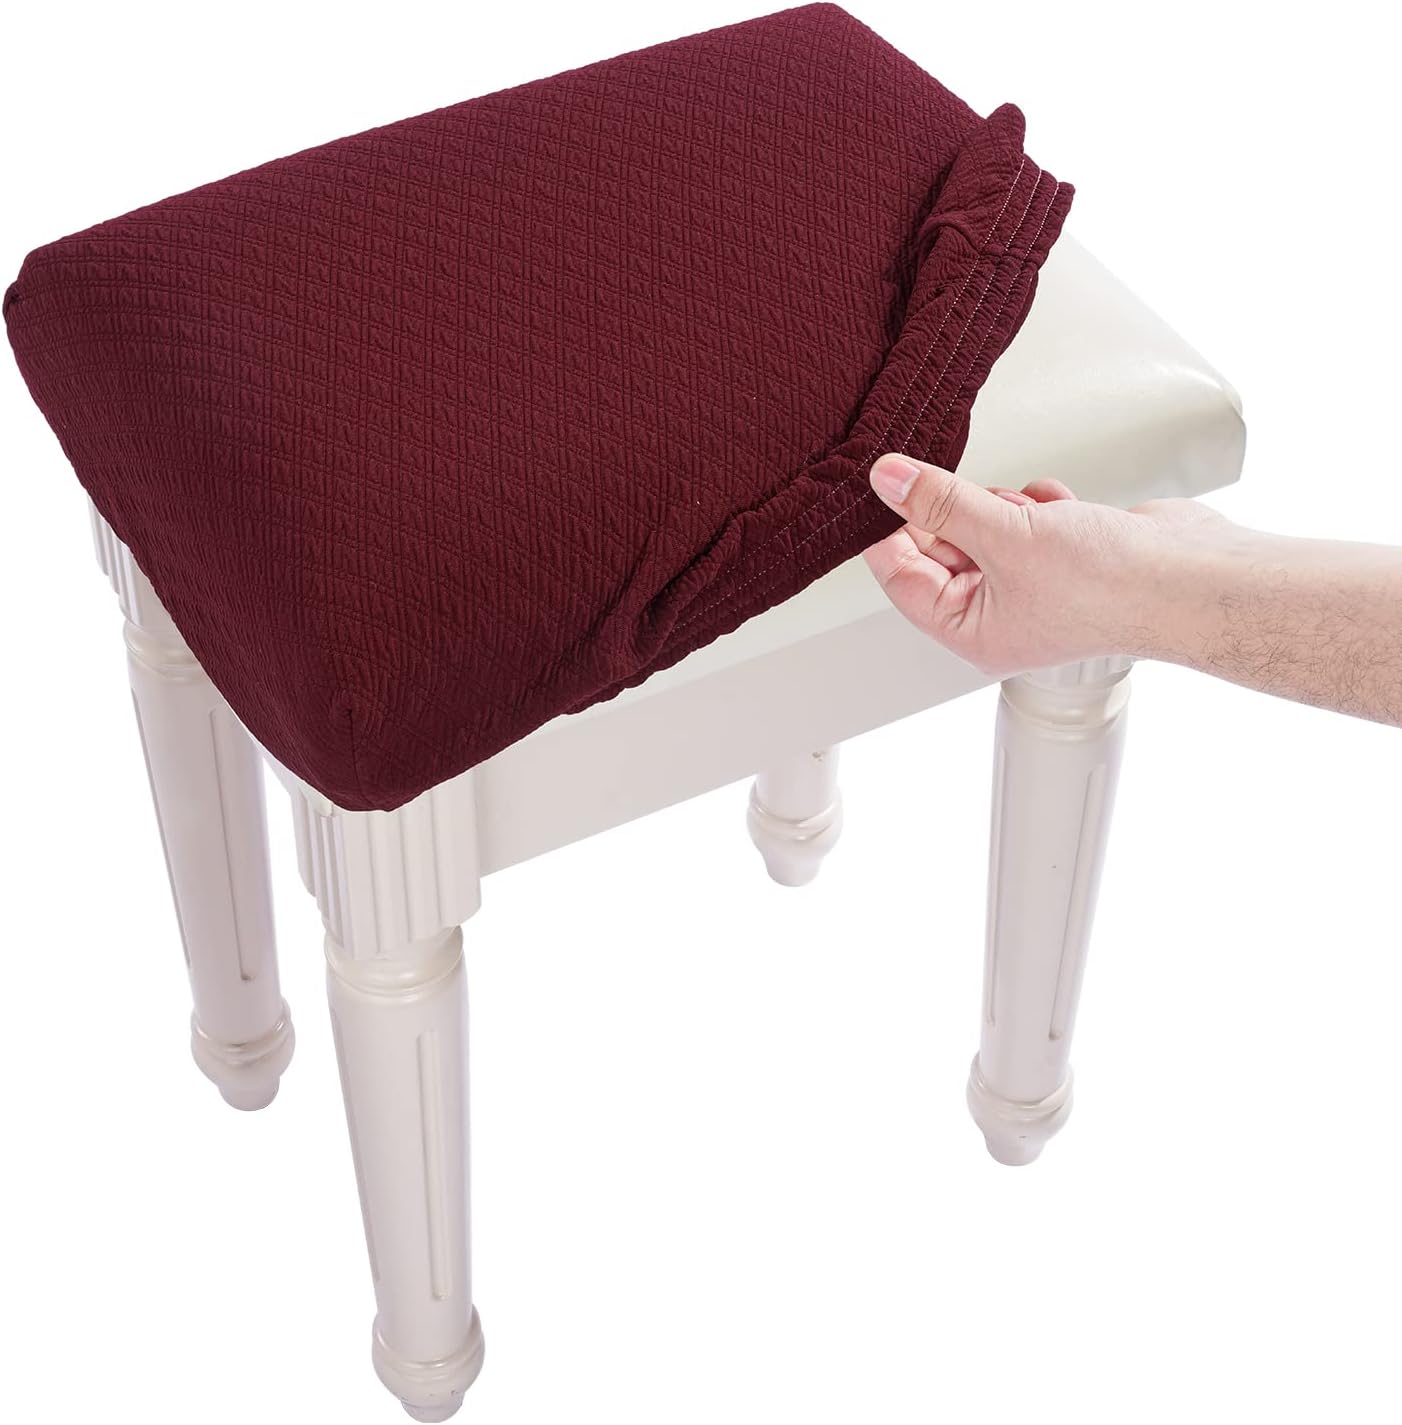 BUYUE Luxury Vanity Bench Stool Cover, (15"- 20") L x (11.8"- 15.7") W Rectangle Small Bench Stretch Jacquard Washable Slipcover (XS, Burgundy)